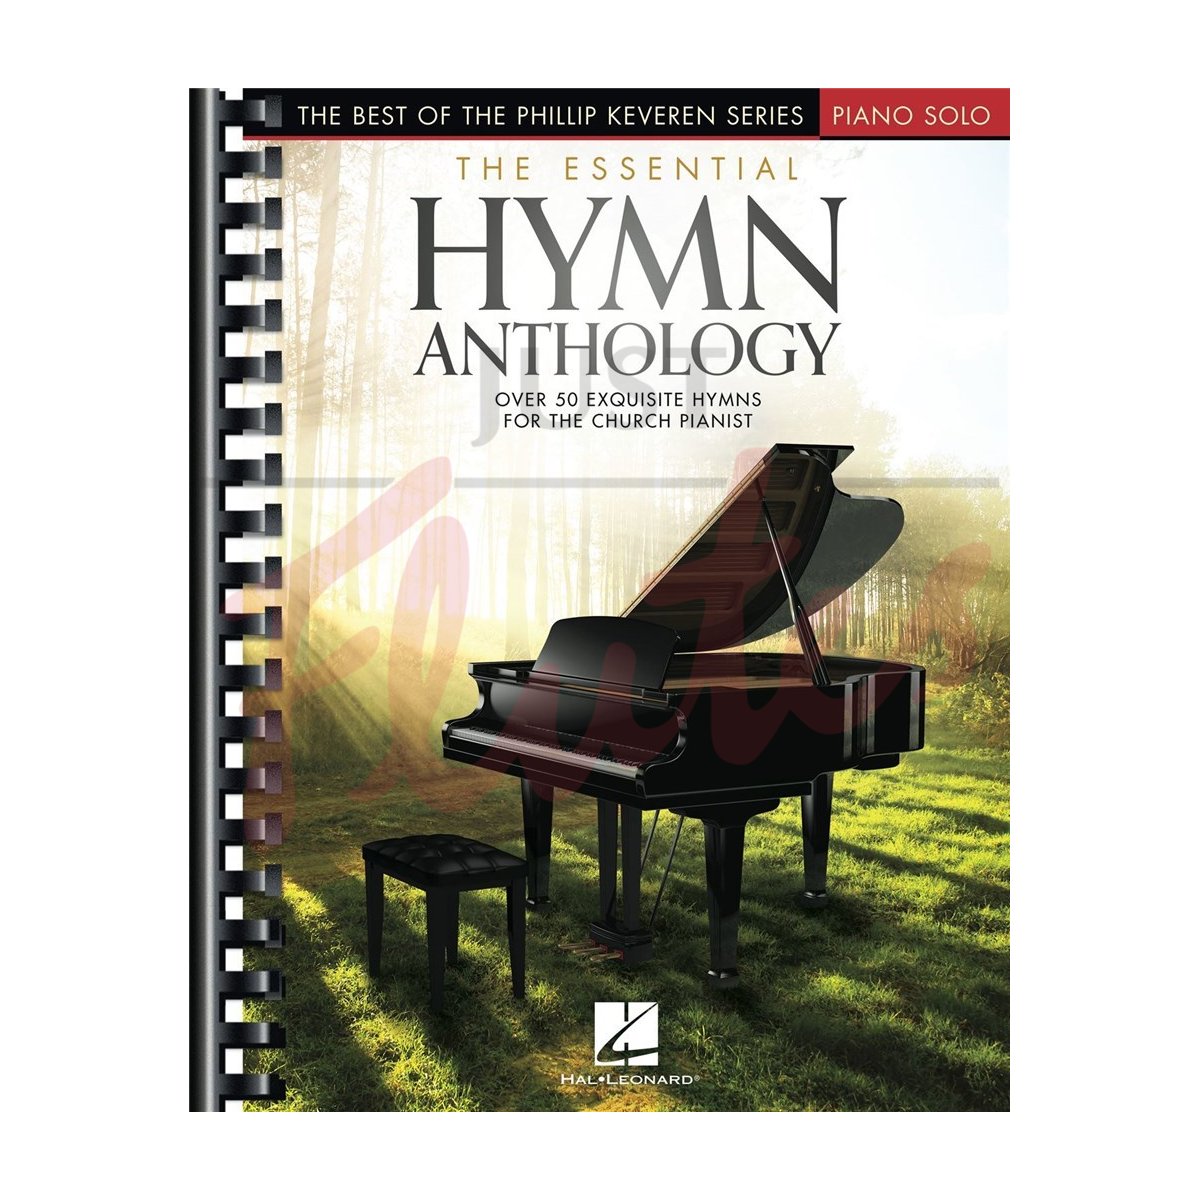 The Essential Hymn Album: Over 50 Exquisite Hymns for the Church Pianist